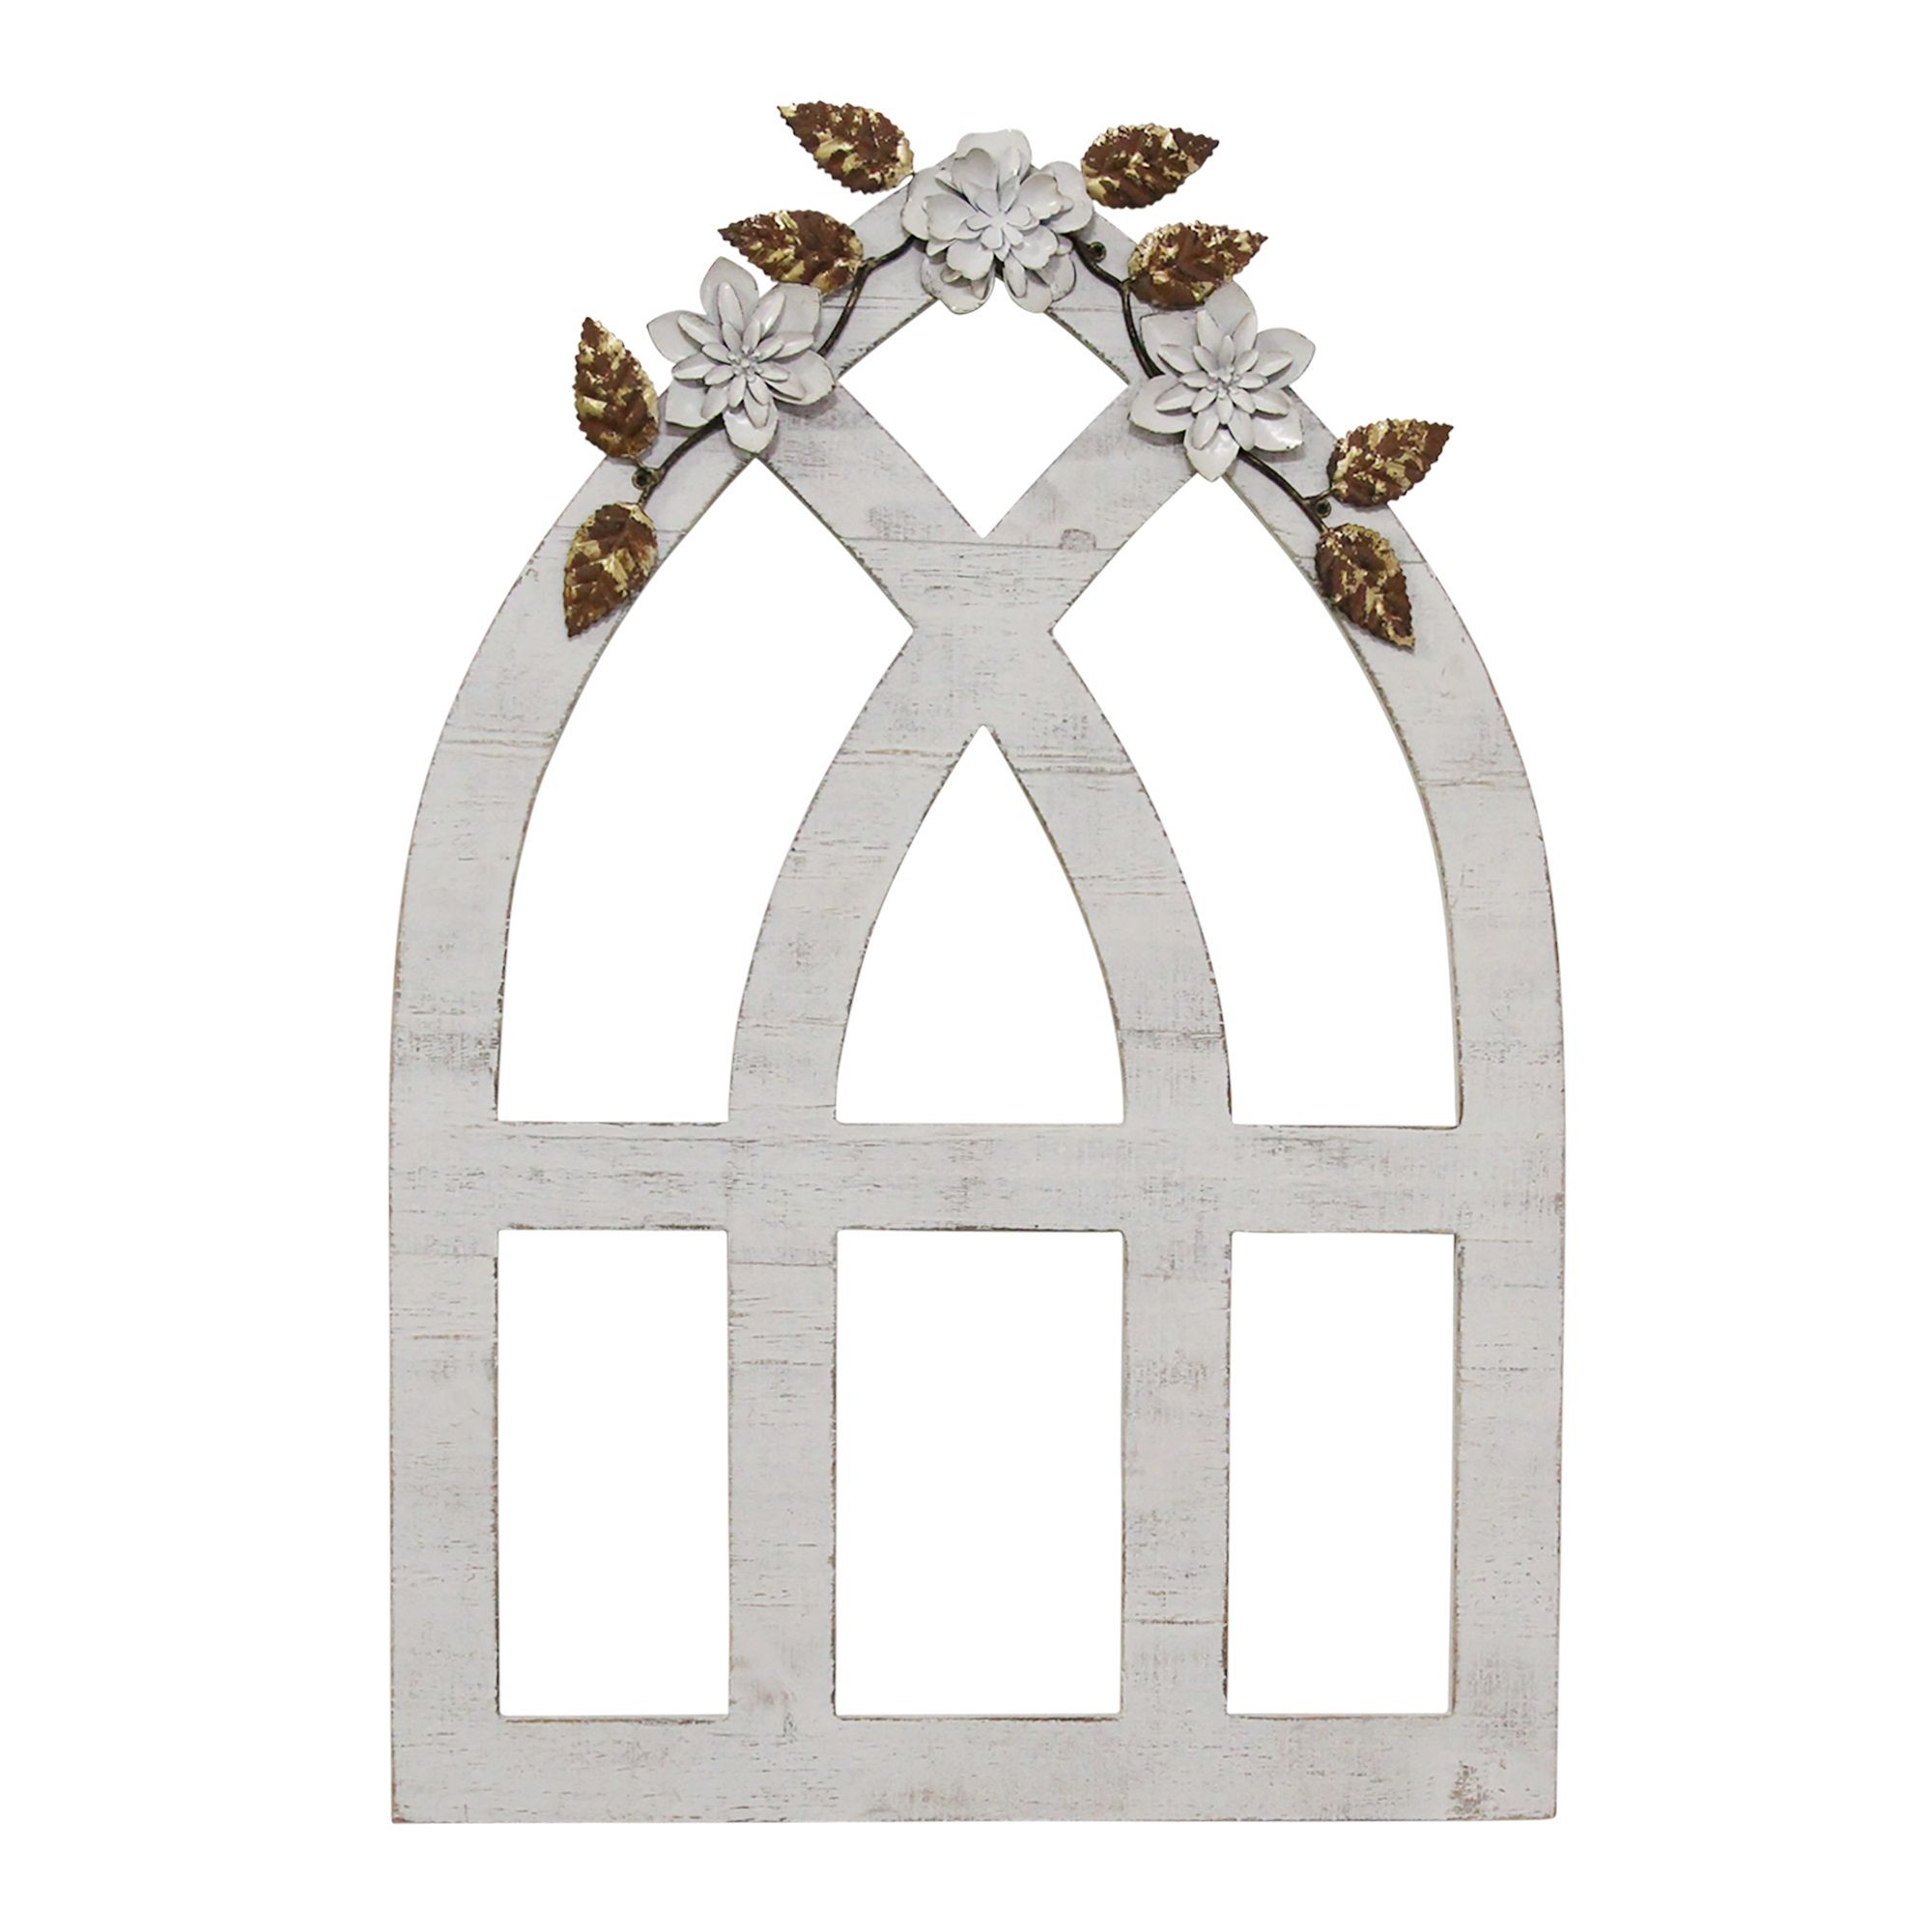 Fashionable Arched Metal Wall Art In Stratton Home Decor White Arch With Metal Flowers Wall Décor – Walmart (View 11 of 15)